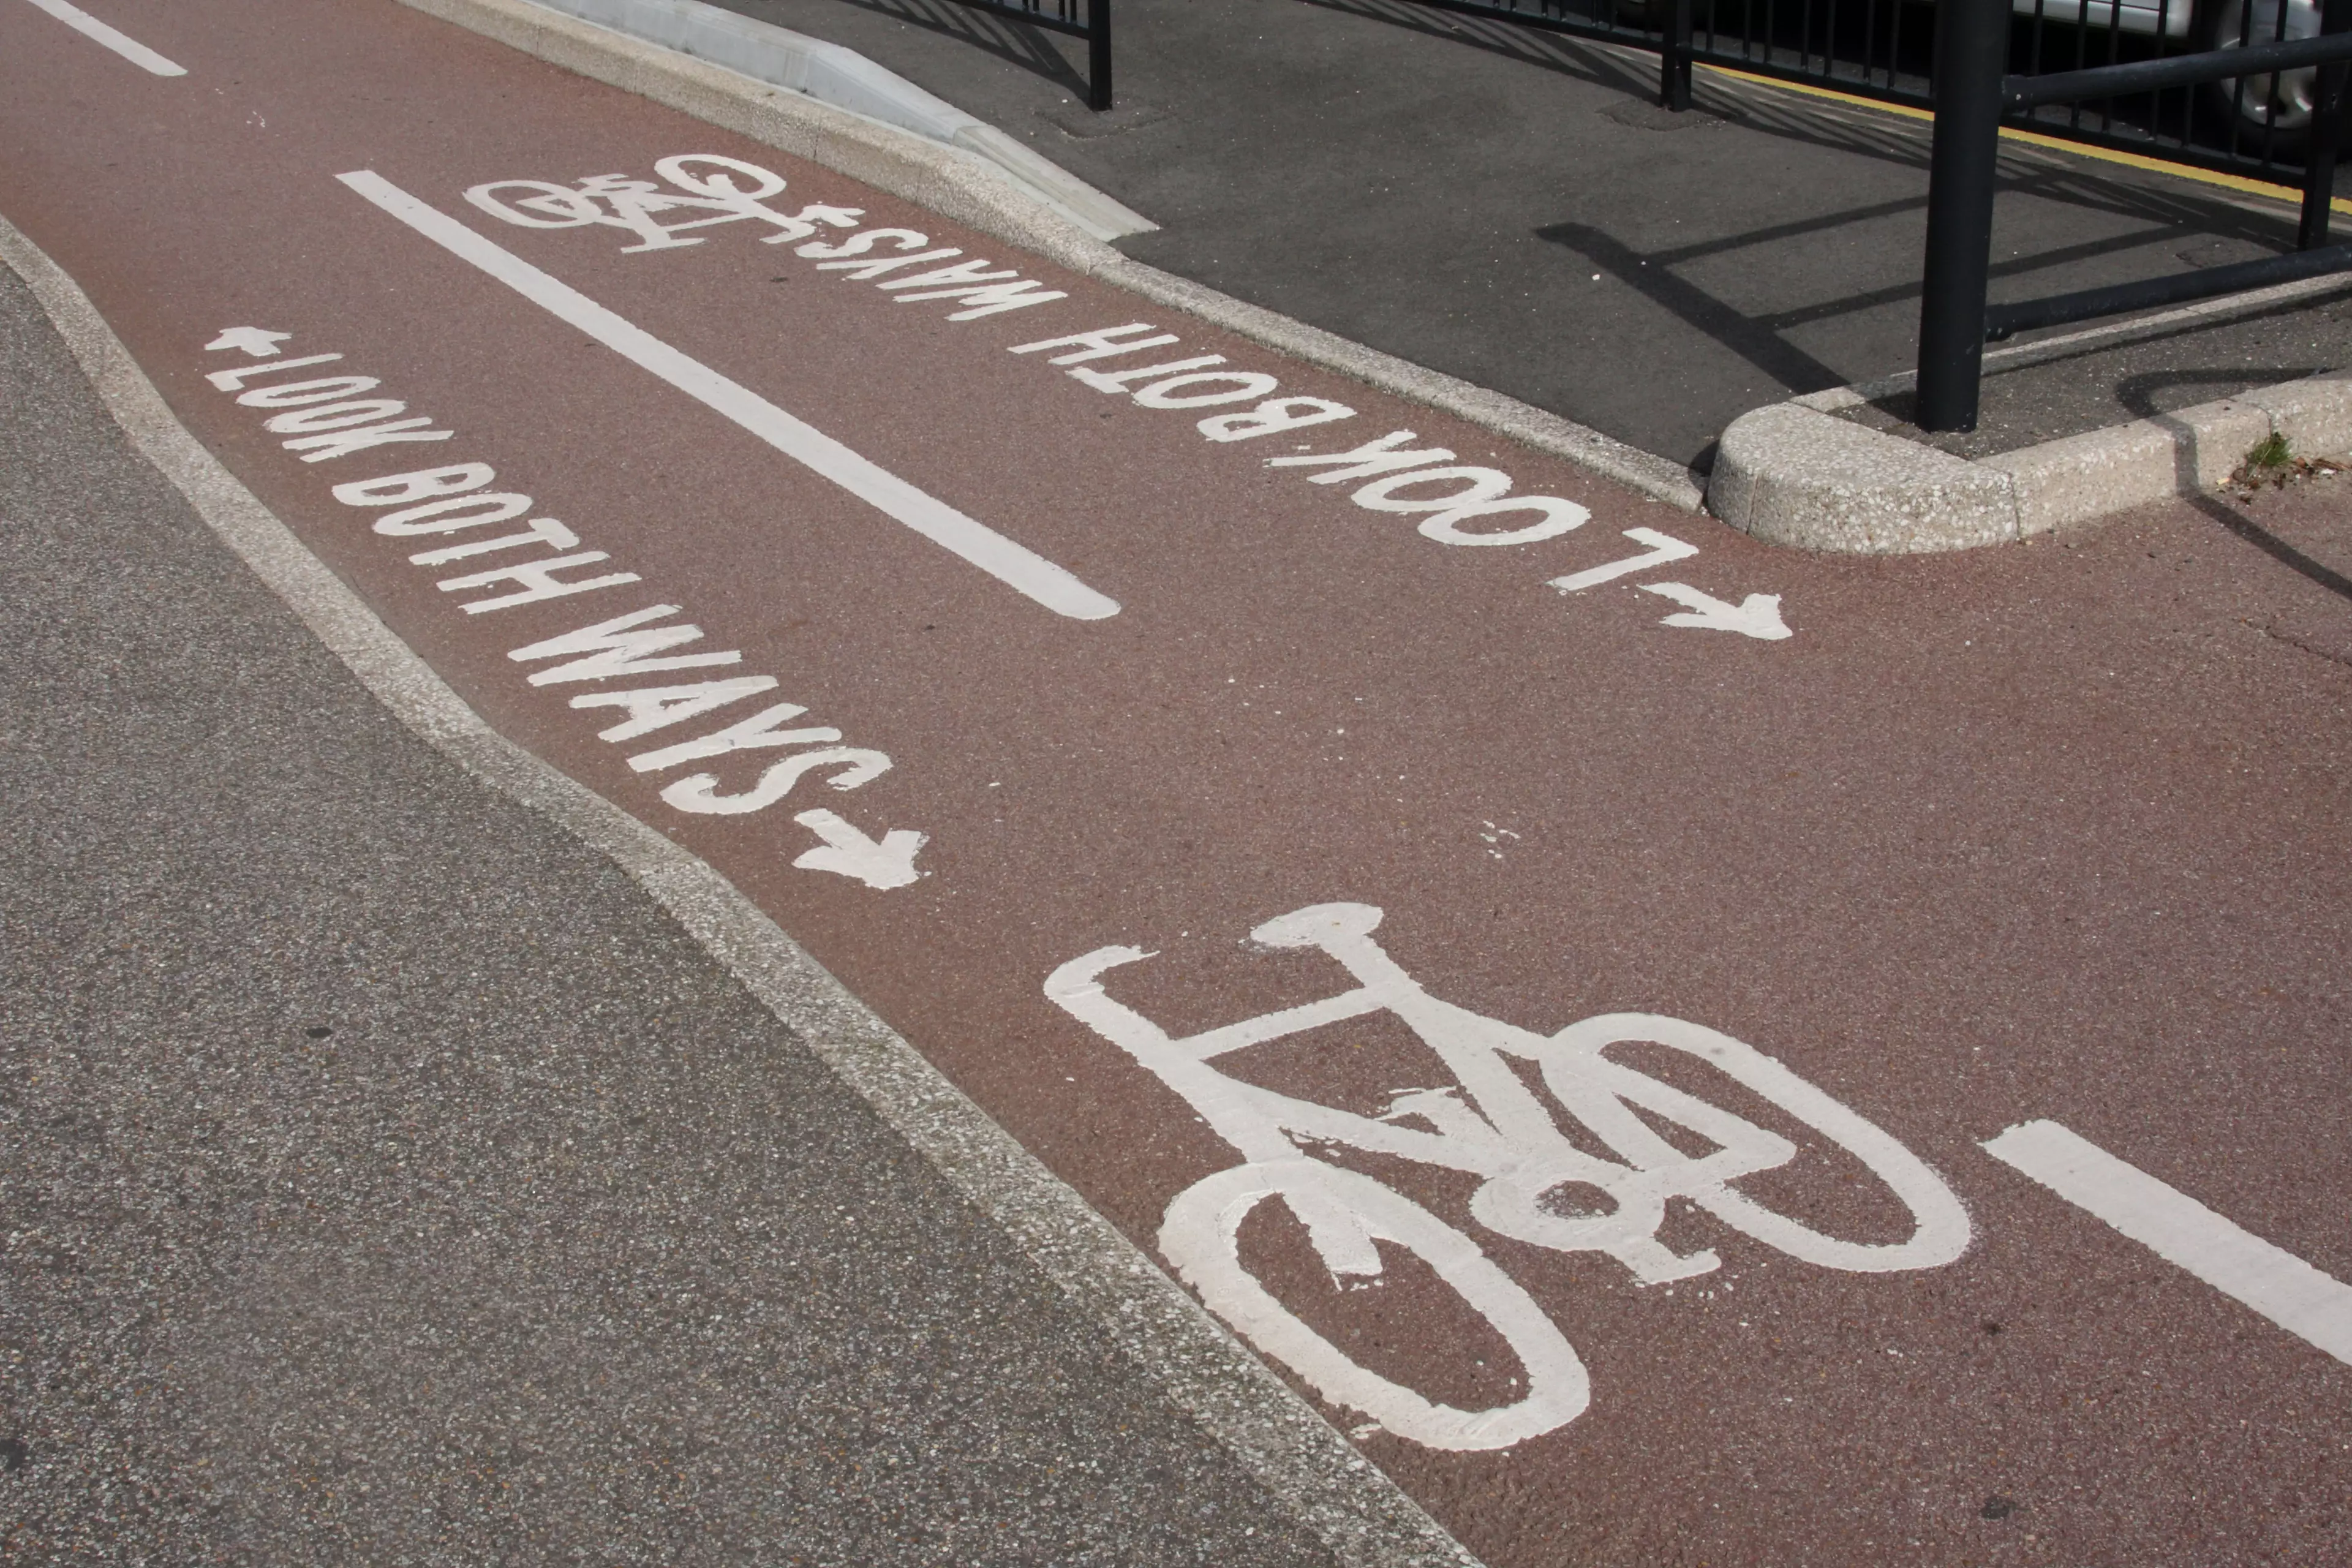 Residents don't think cyclists are even using the new cycle paths.